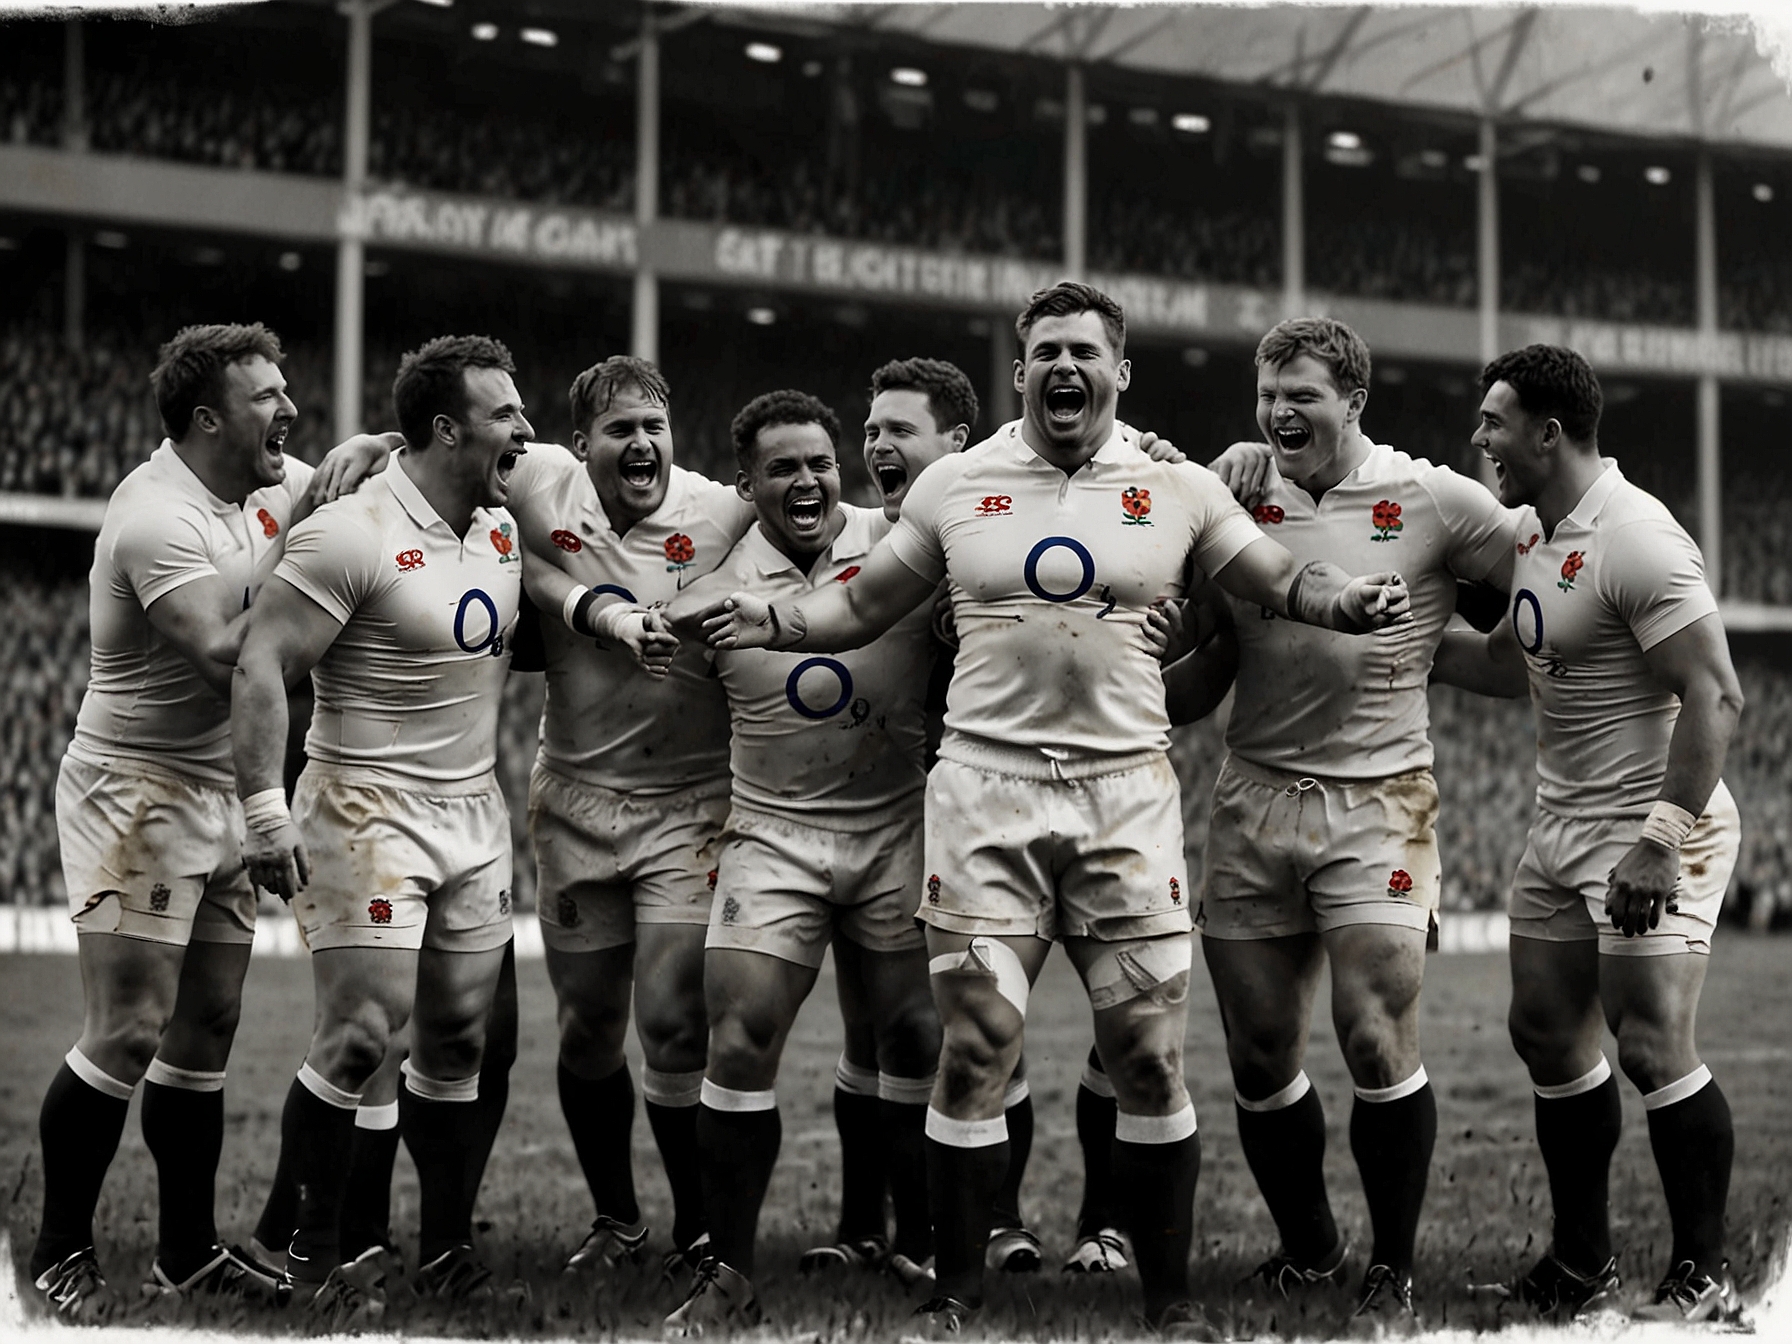 England's rugby team celebrates a well-executed try, a testament to their tactical prowess and Marcus Smith's ingenuity in creating scoring opportunities.